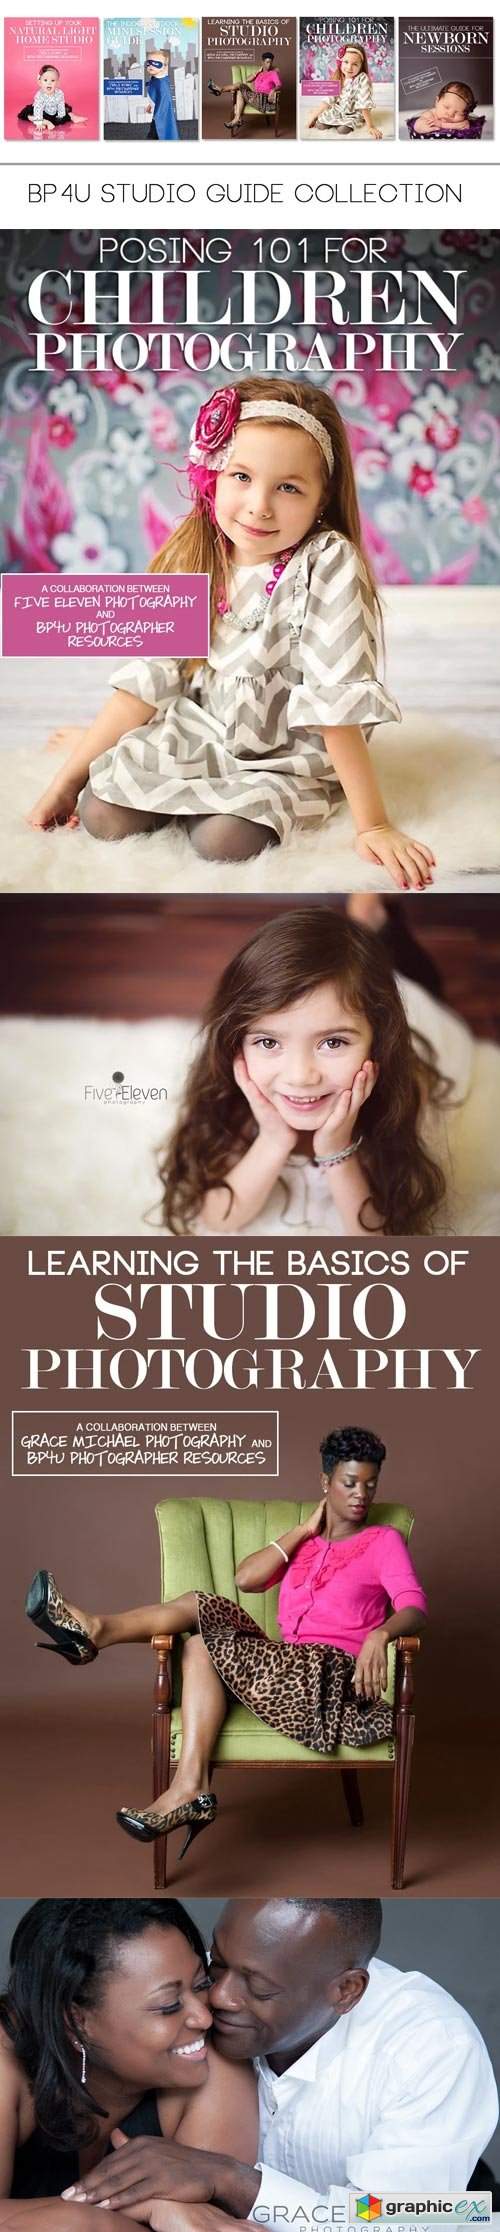 Photographer Resources - BP4U Studio Guide Collection